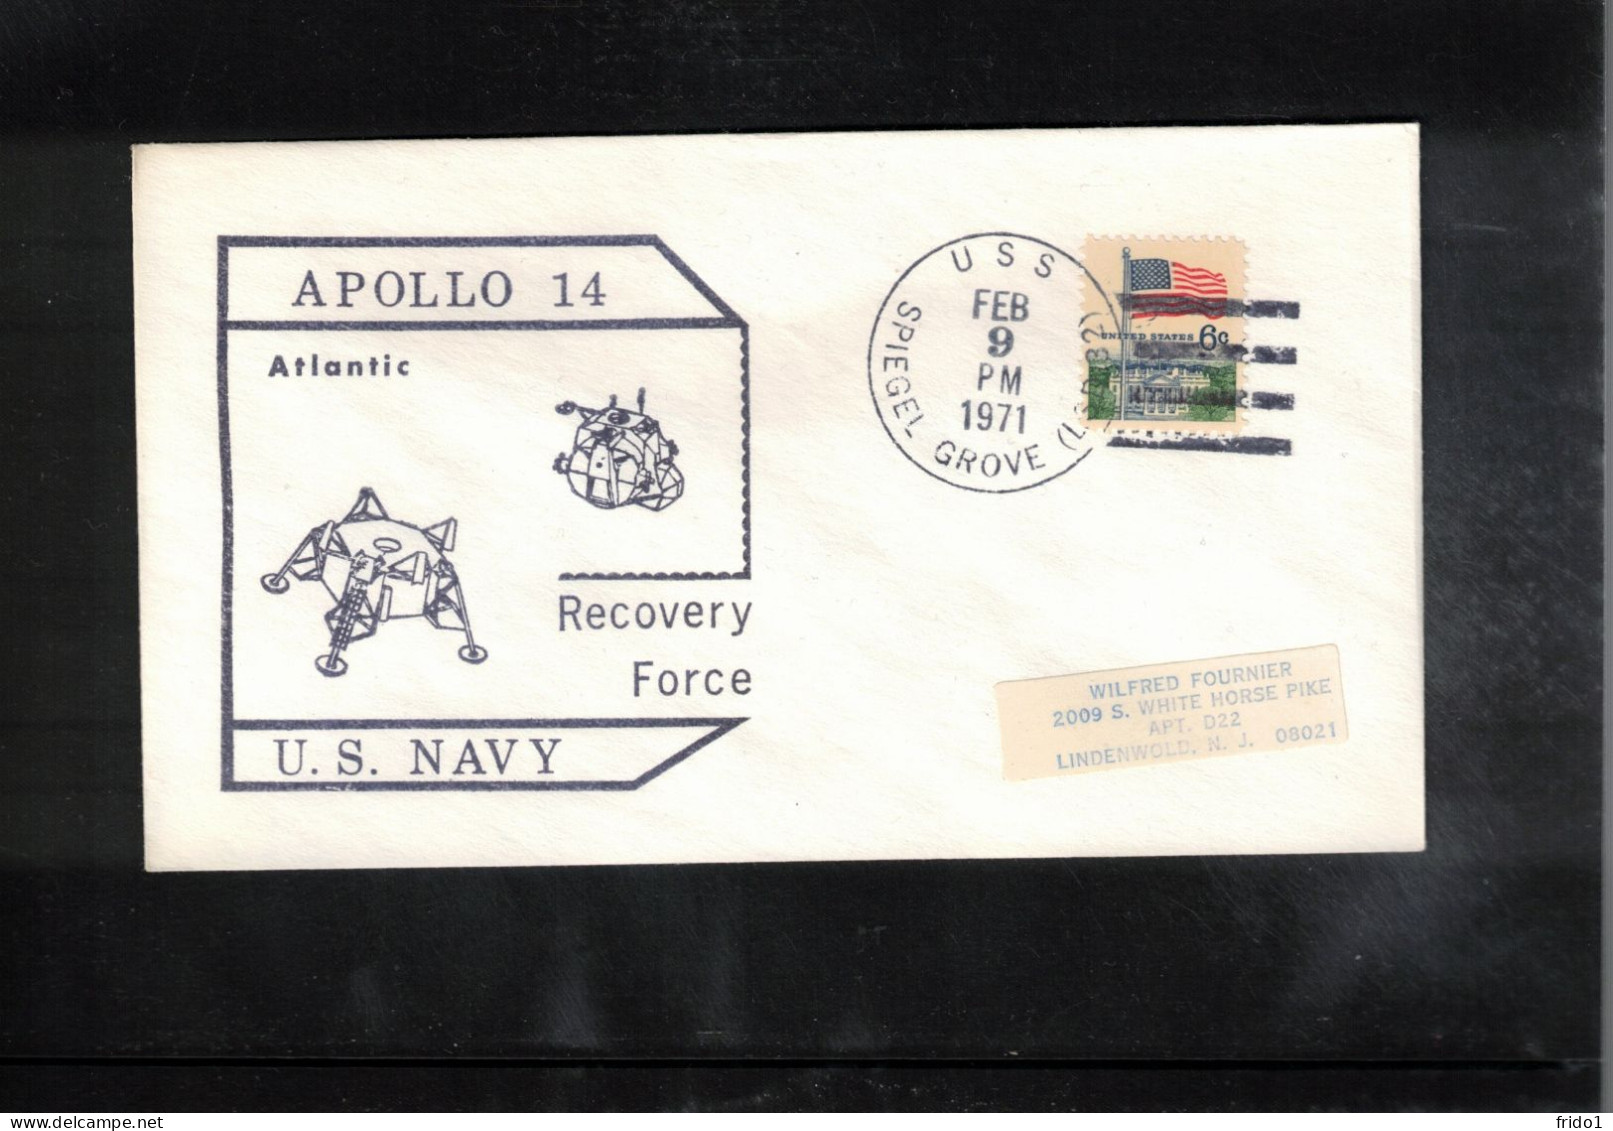 USA 1971 Space / Weltraum - Apollo 14 - US Navy Recovery Force Atlantic USS SPIEGEL Interesting Cover - USA